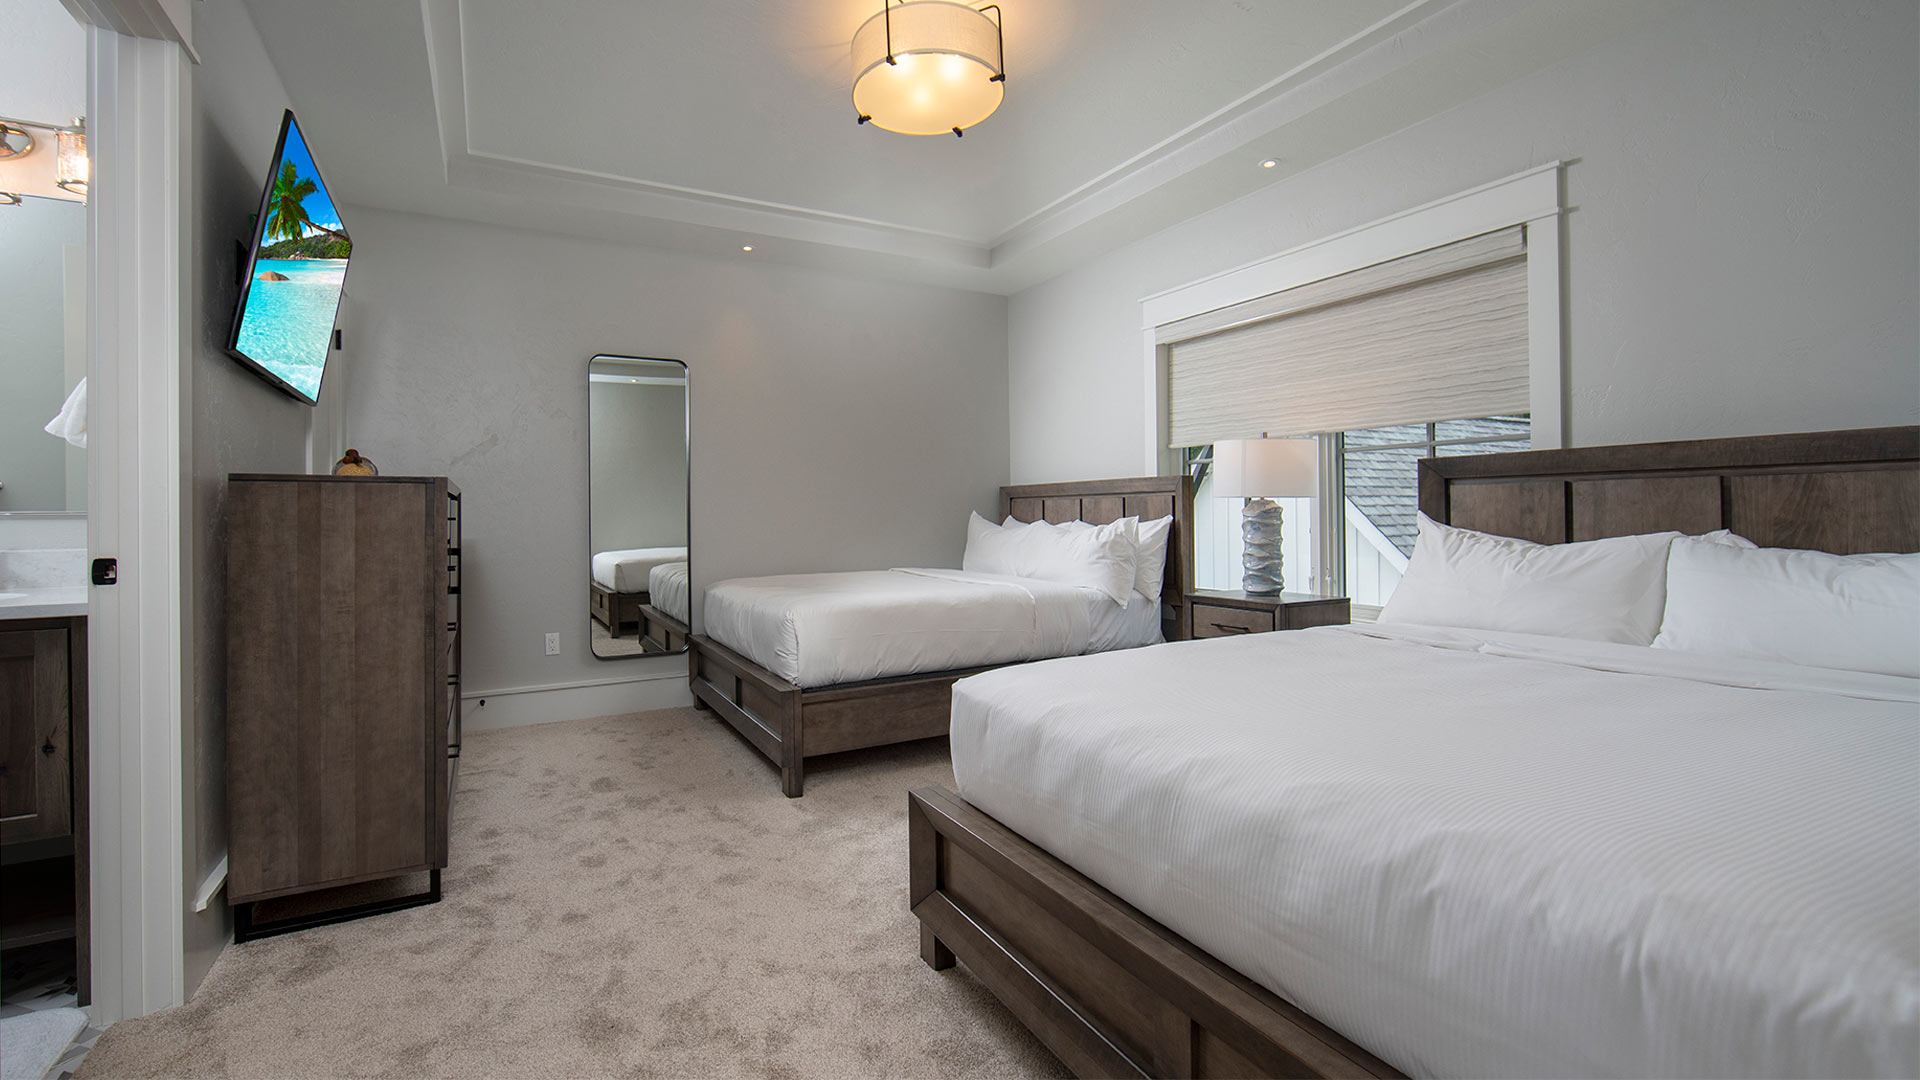 interior shot of a bedroom with two queen beds. Each bed has all white linens and wooden headboard. There is a dresser with a tv mounted overhead across from the beds. A door is open revealing a bathroom